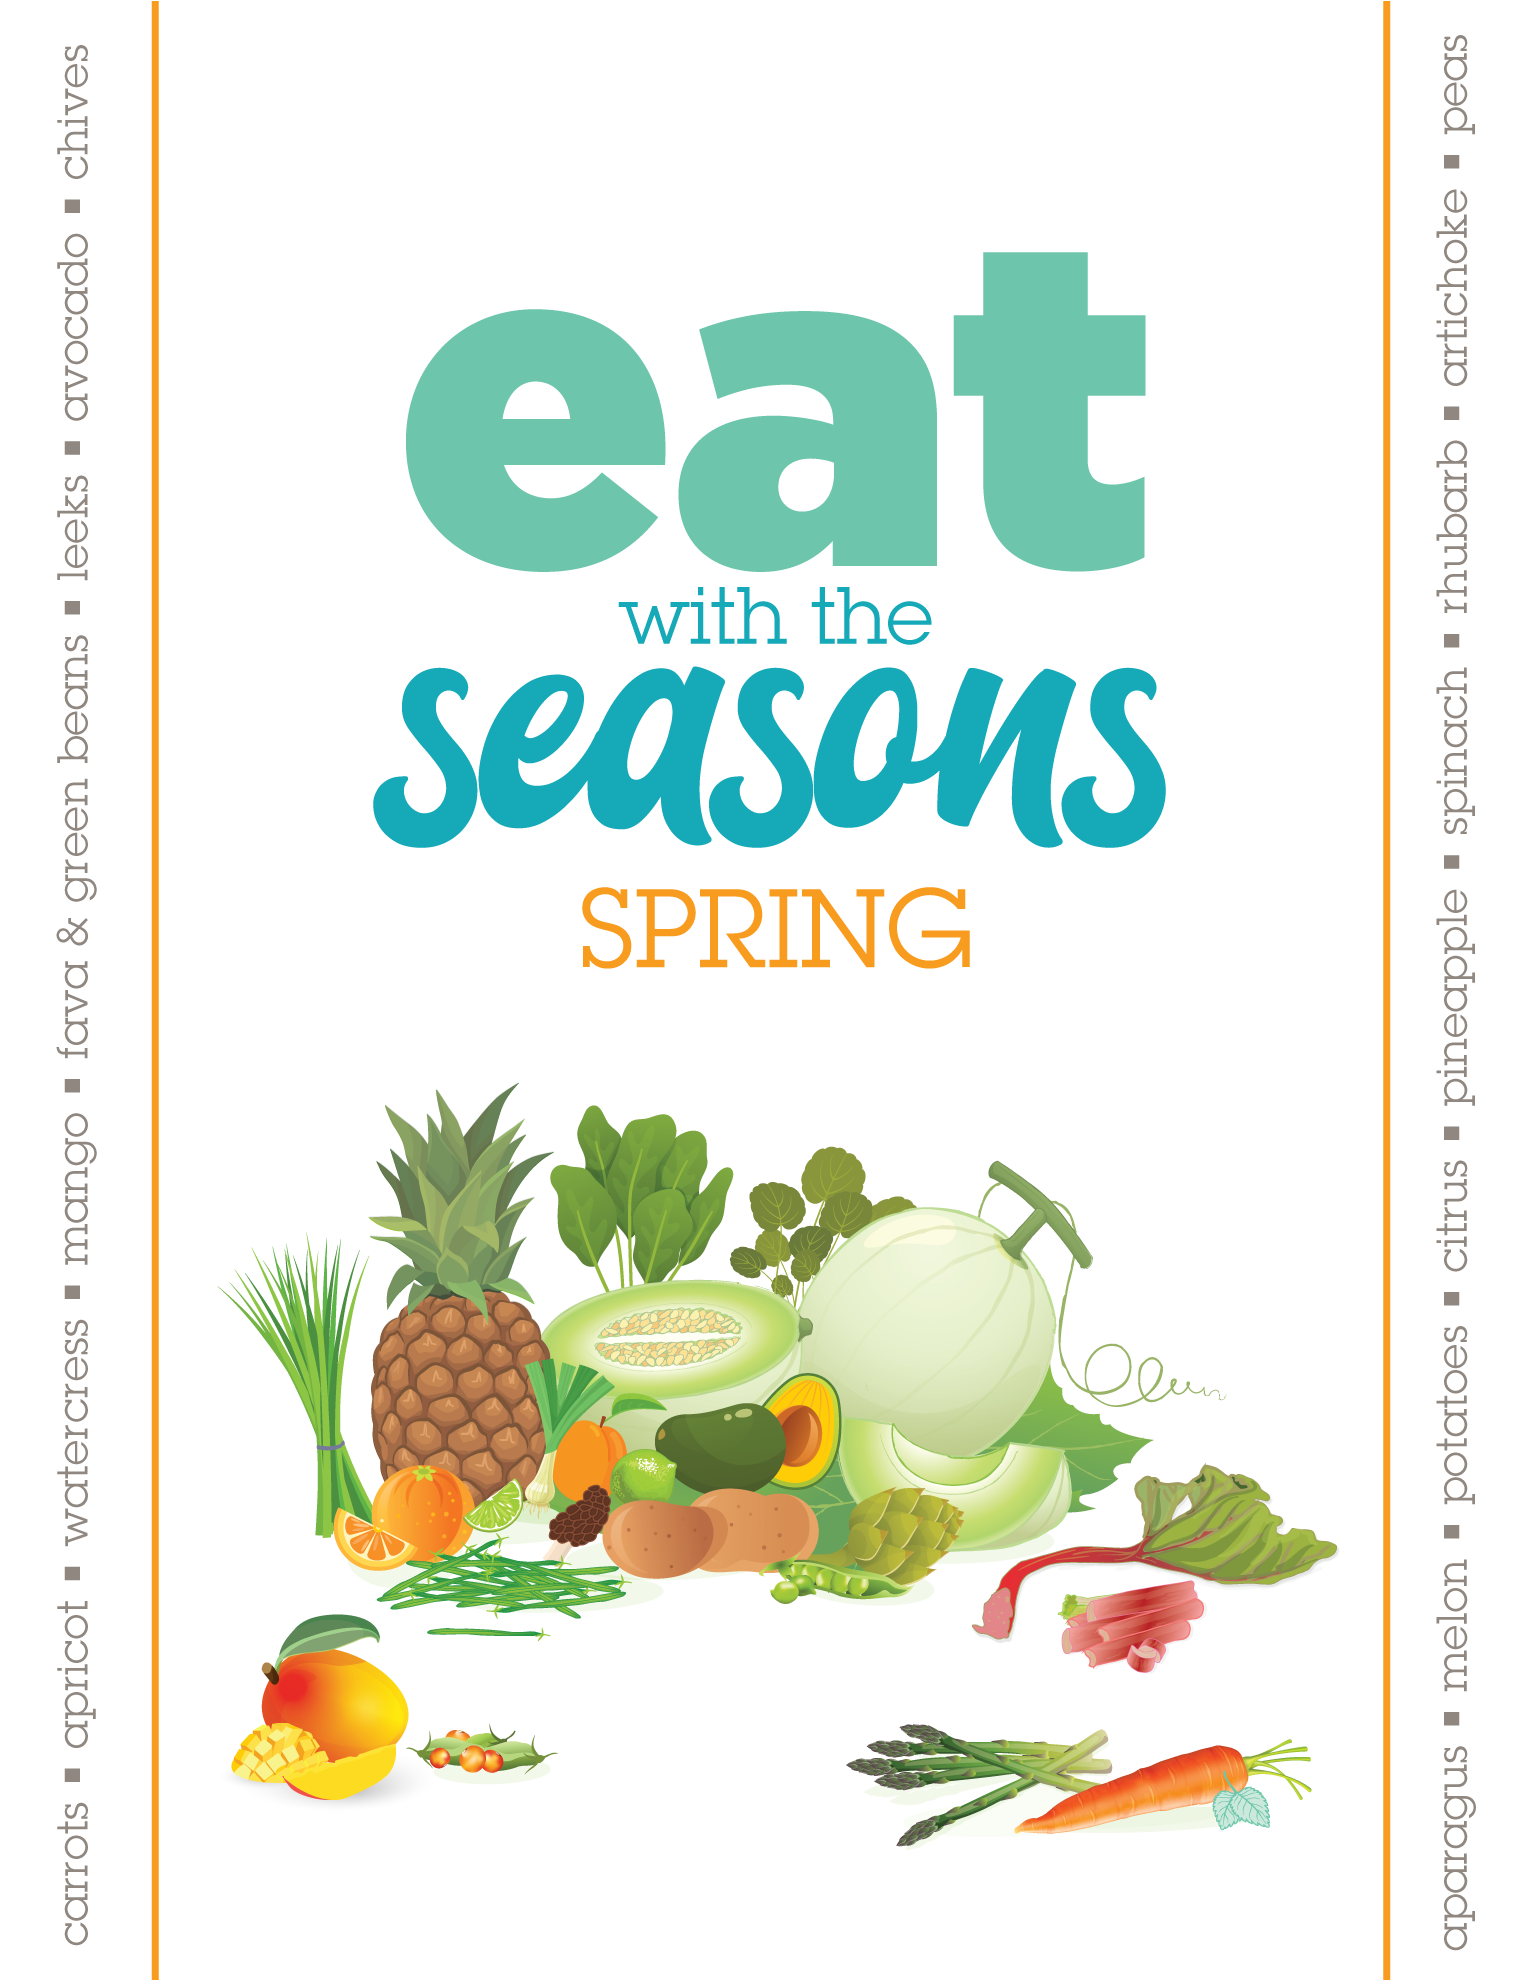 2 Eat-with-the-Seasons-Spring-vert.png